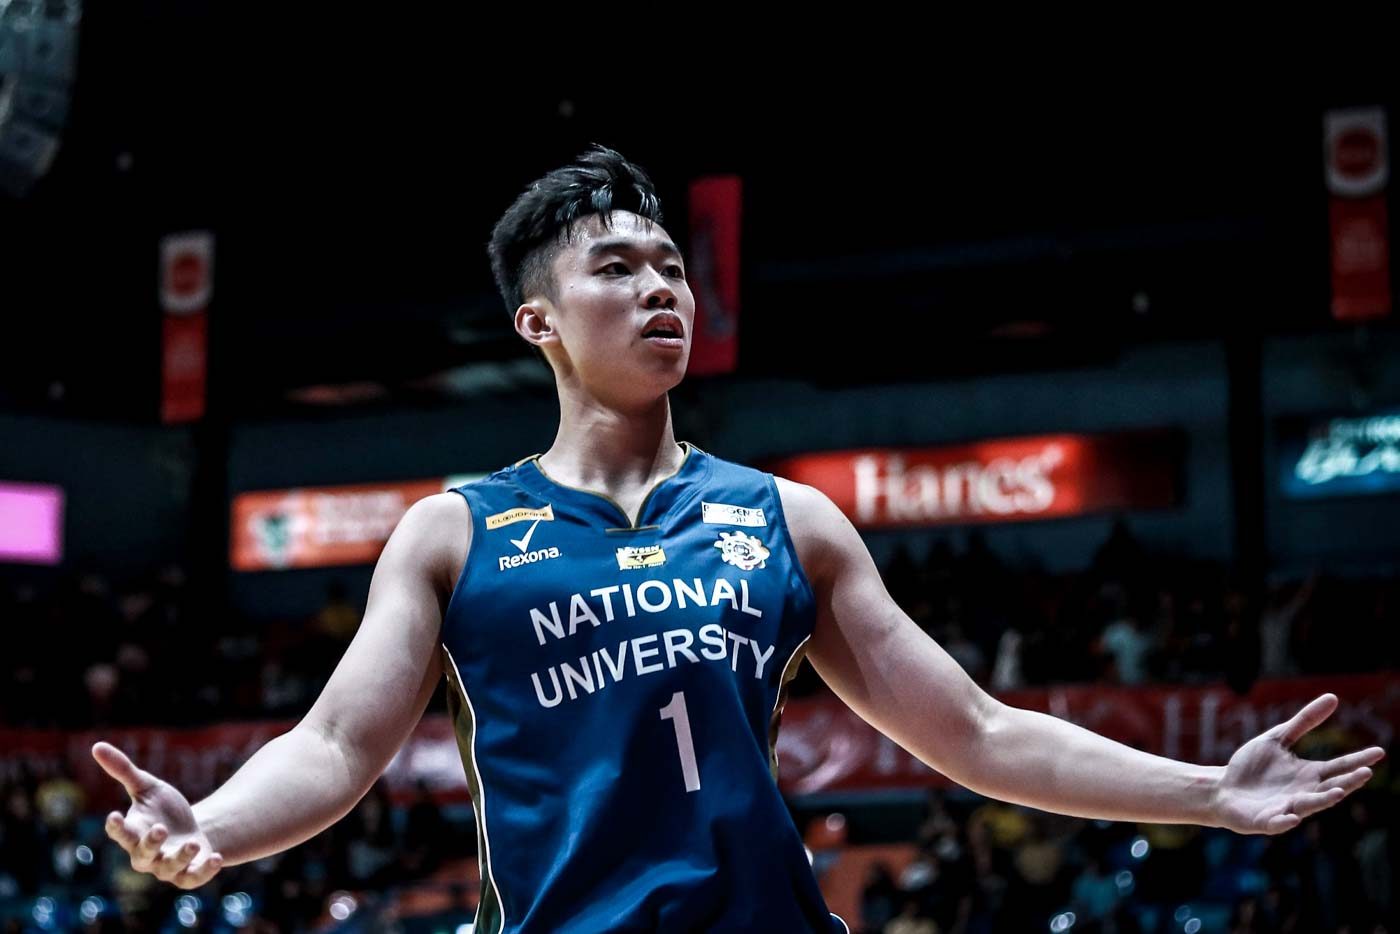 WATCH: NU Bulldogs continue building with loaded young core